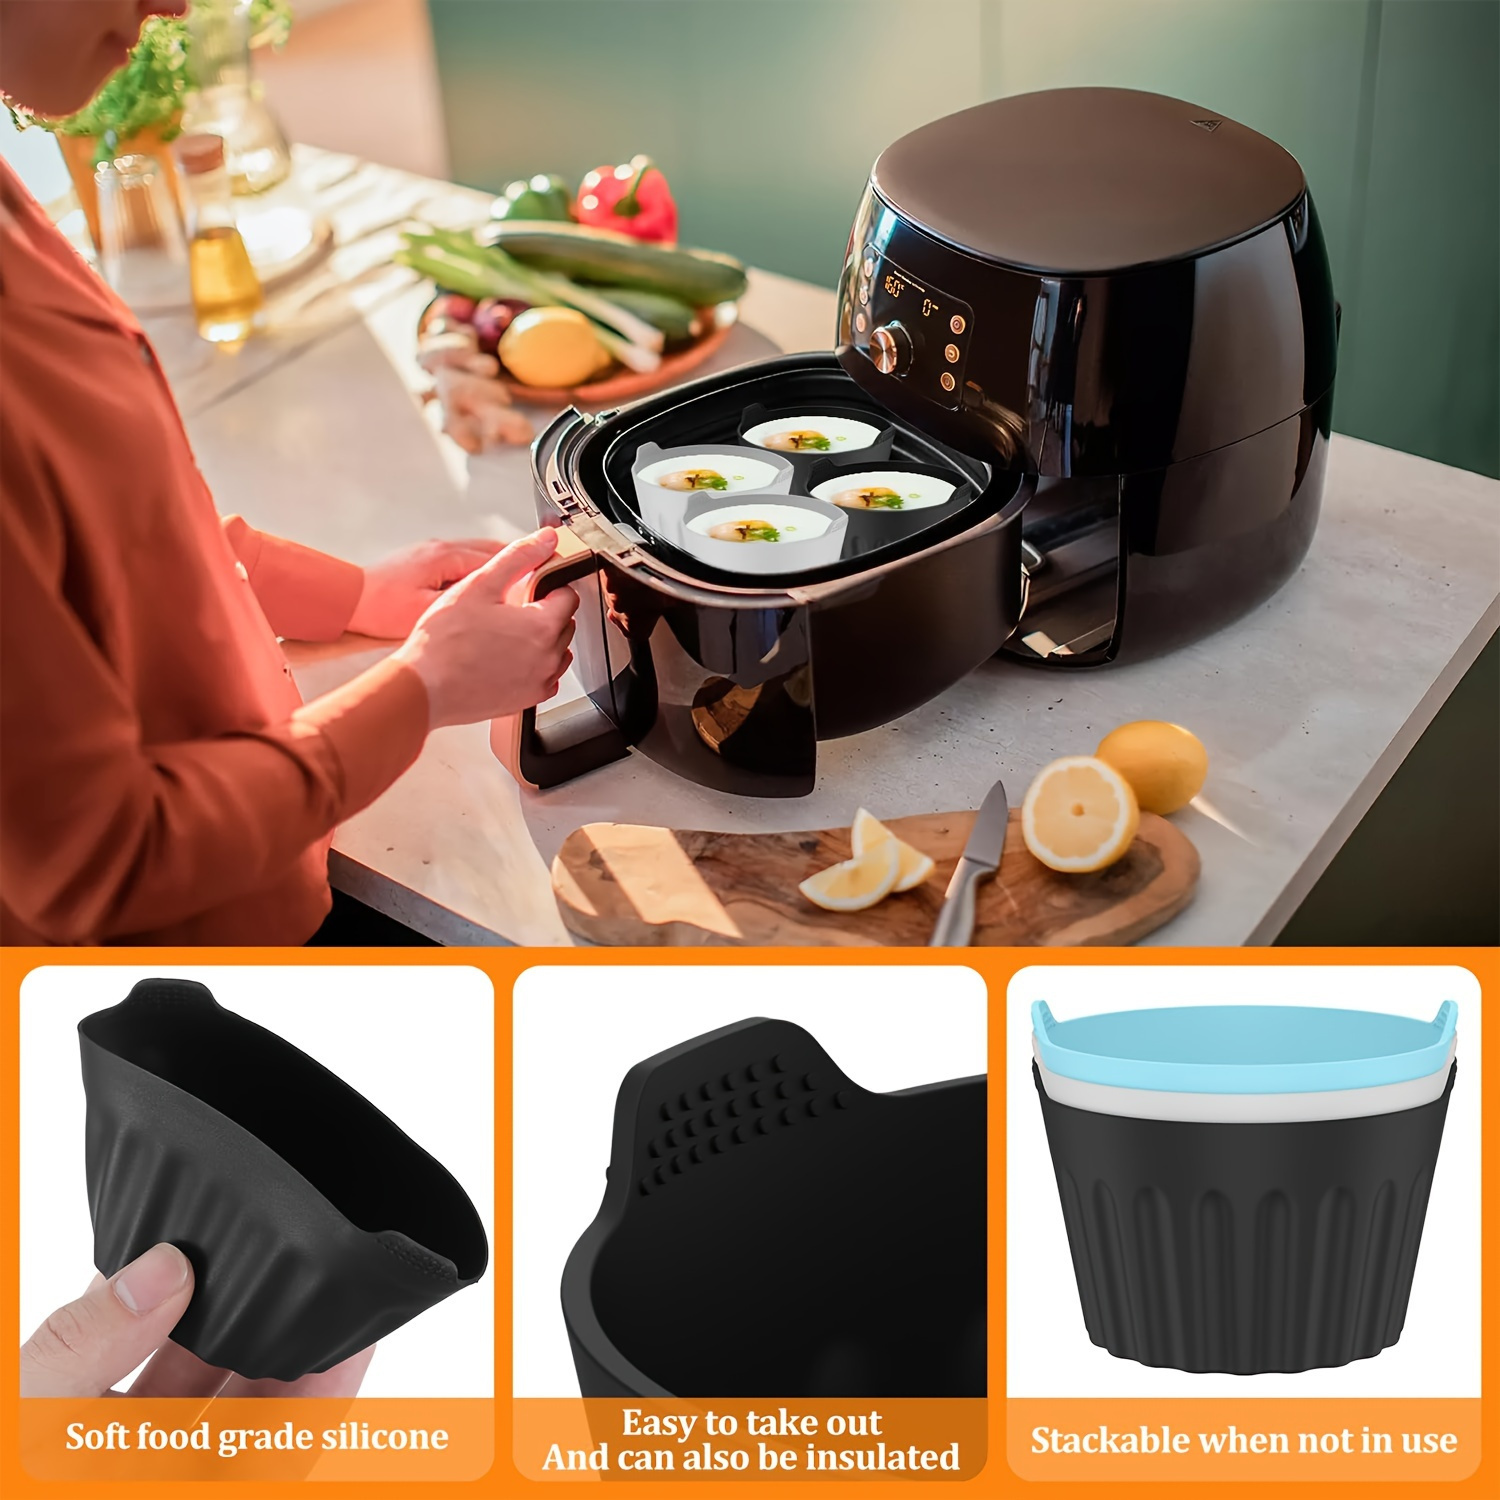 

3/6/9pcs Silicone Air Fryer Egg Mold, Reusable Food Grade Nonstick Silicone Cupcake Molds, Bpa Free, Stovetop Egg Cooking For Microwave, Baking, Air Fryer